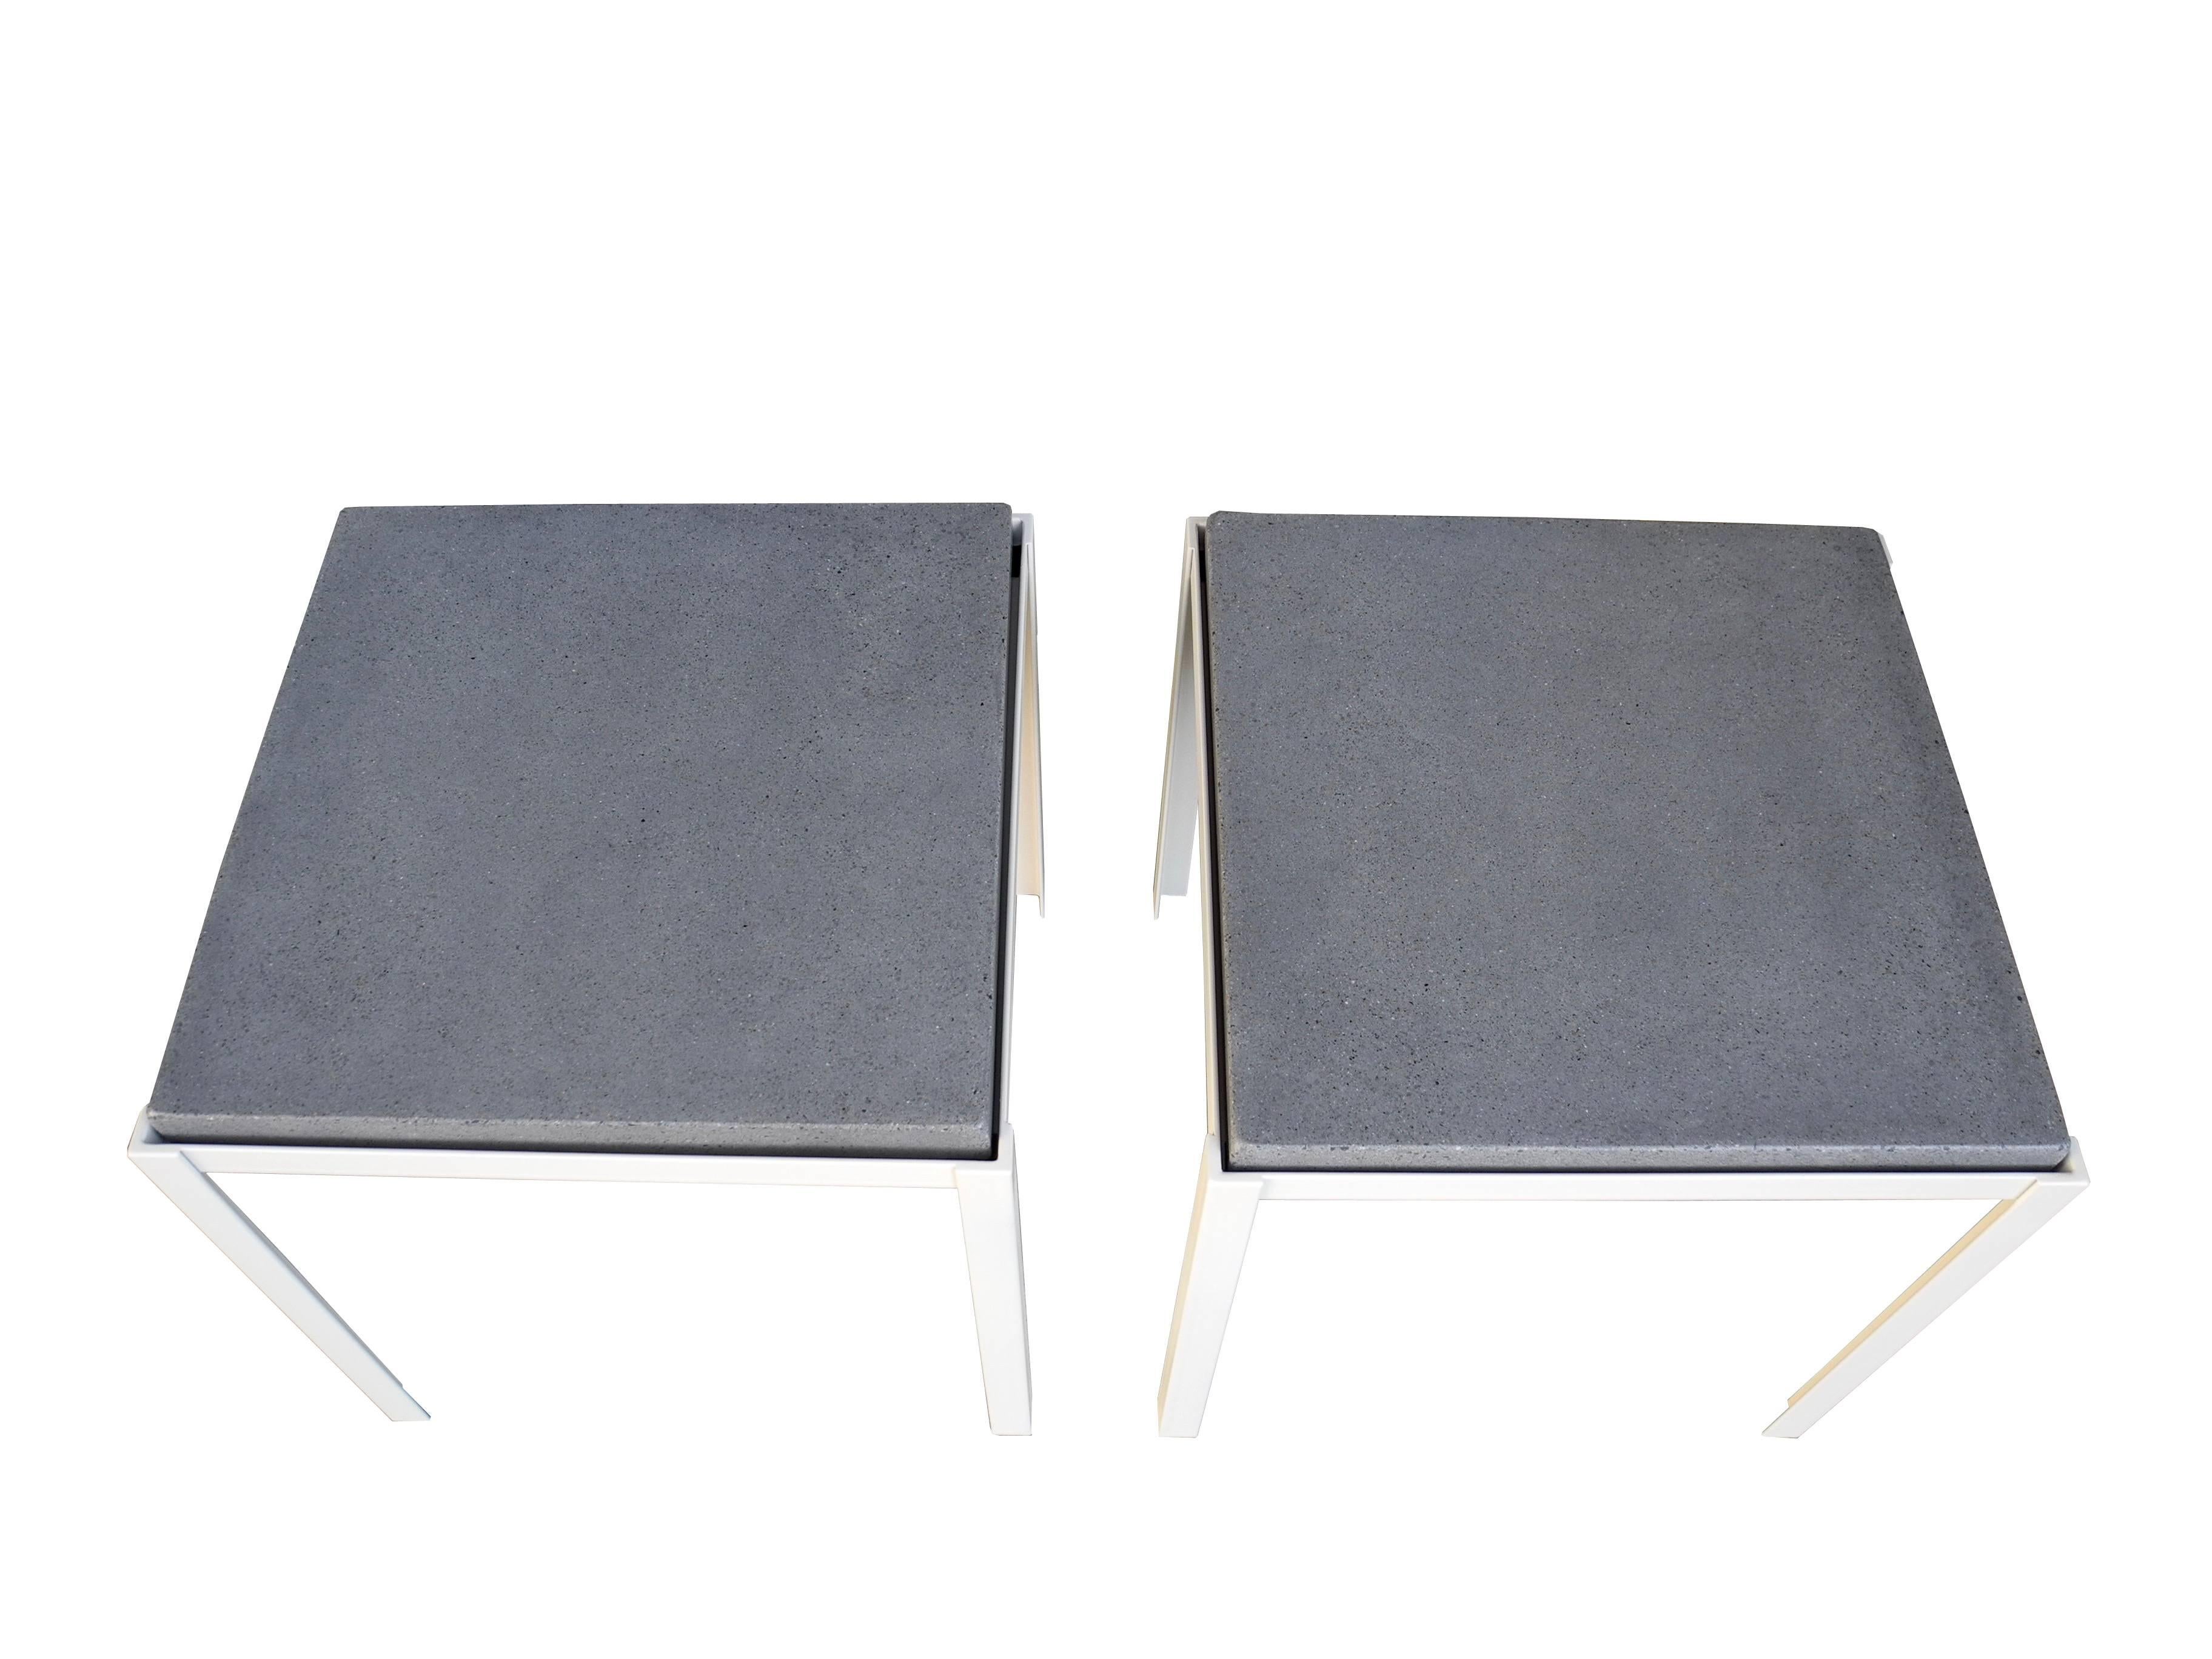 Polished Concrete and Welded Steel Night Stands, Coffee Tables, Corinne Robbins (amerikanisch) im Angebot